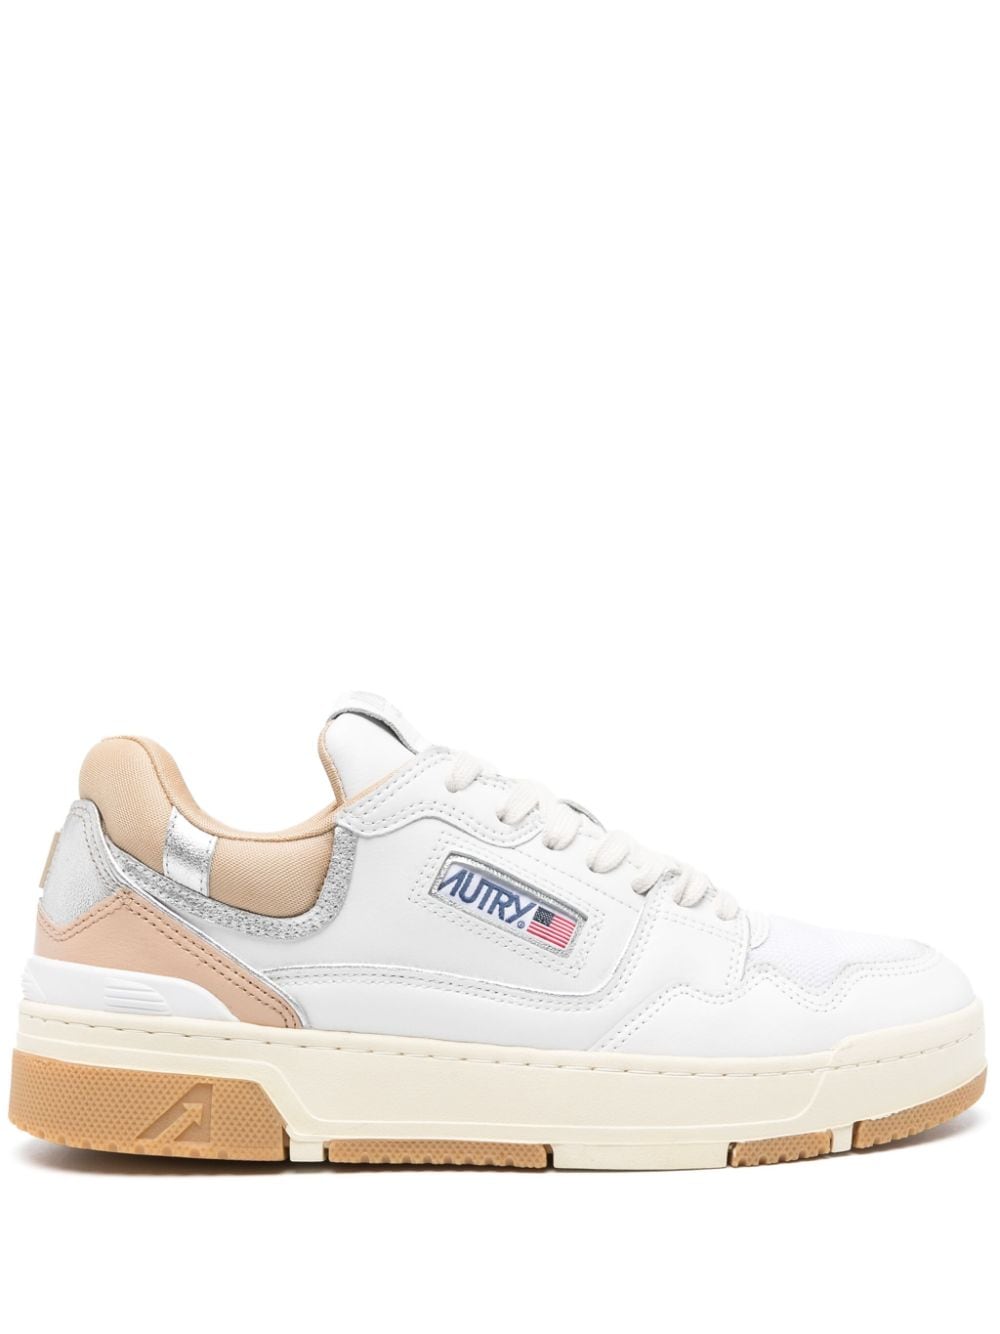 Autry Clc Panelled Sneakers In Wht/silv/candging